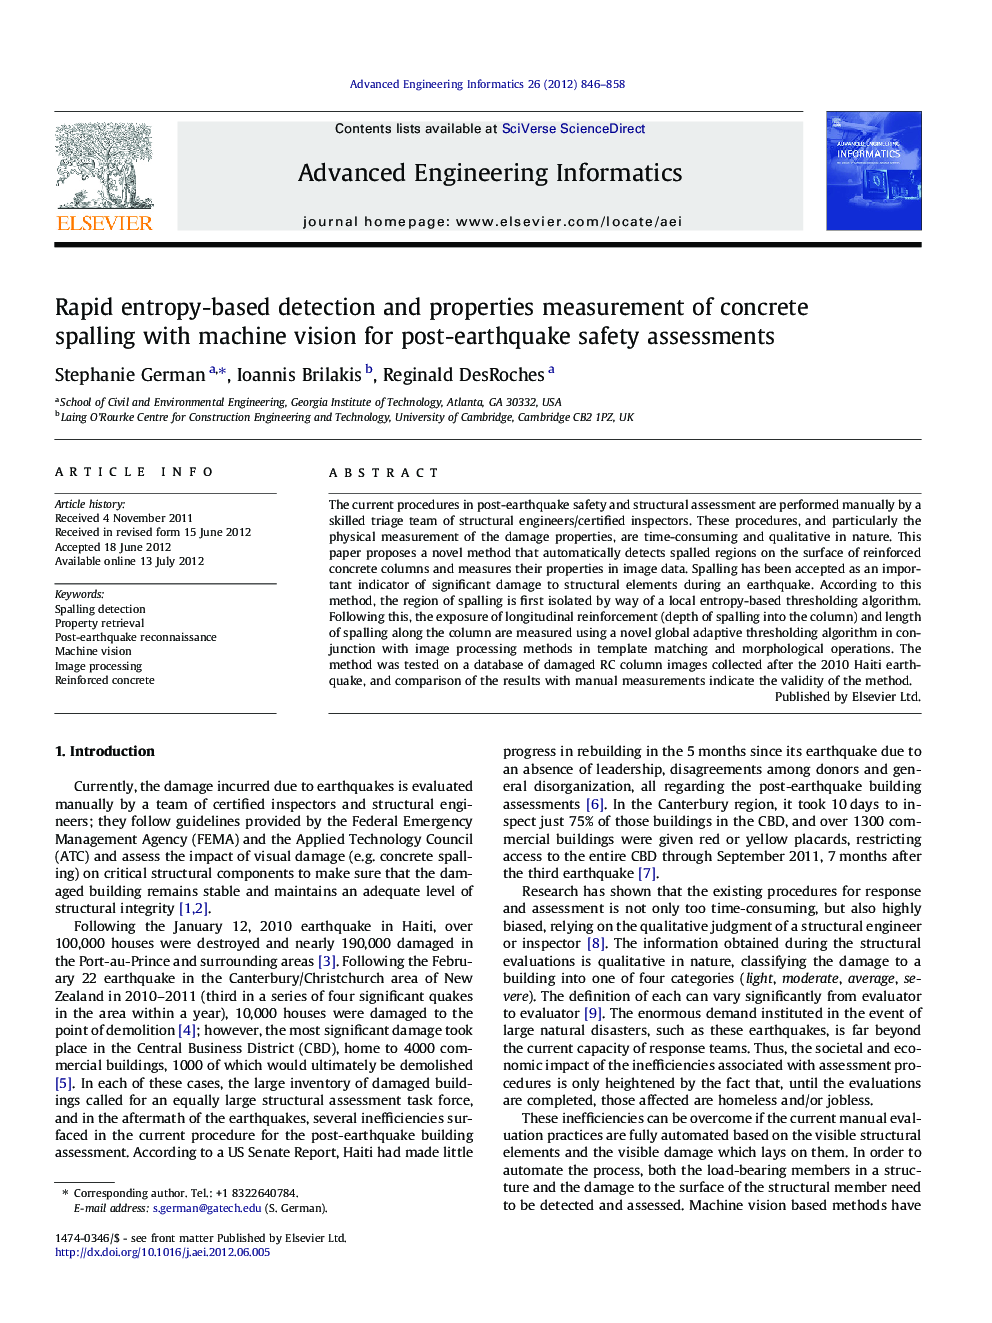 Rapid entropy-based detection and properties measurement of concrete spalling with machine vision for post-earthquake safety assessments